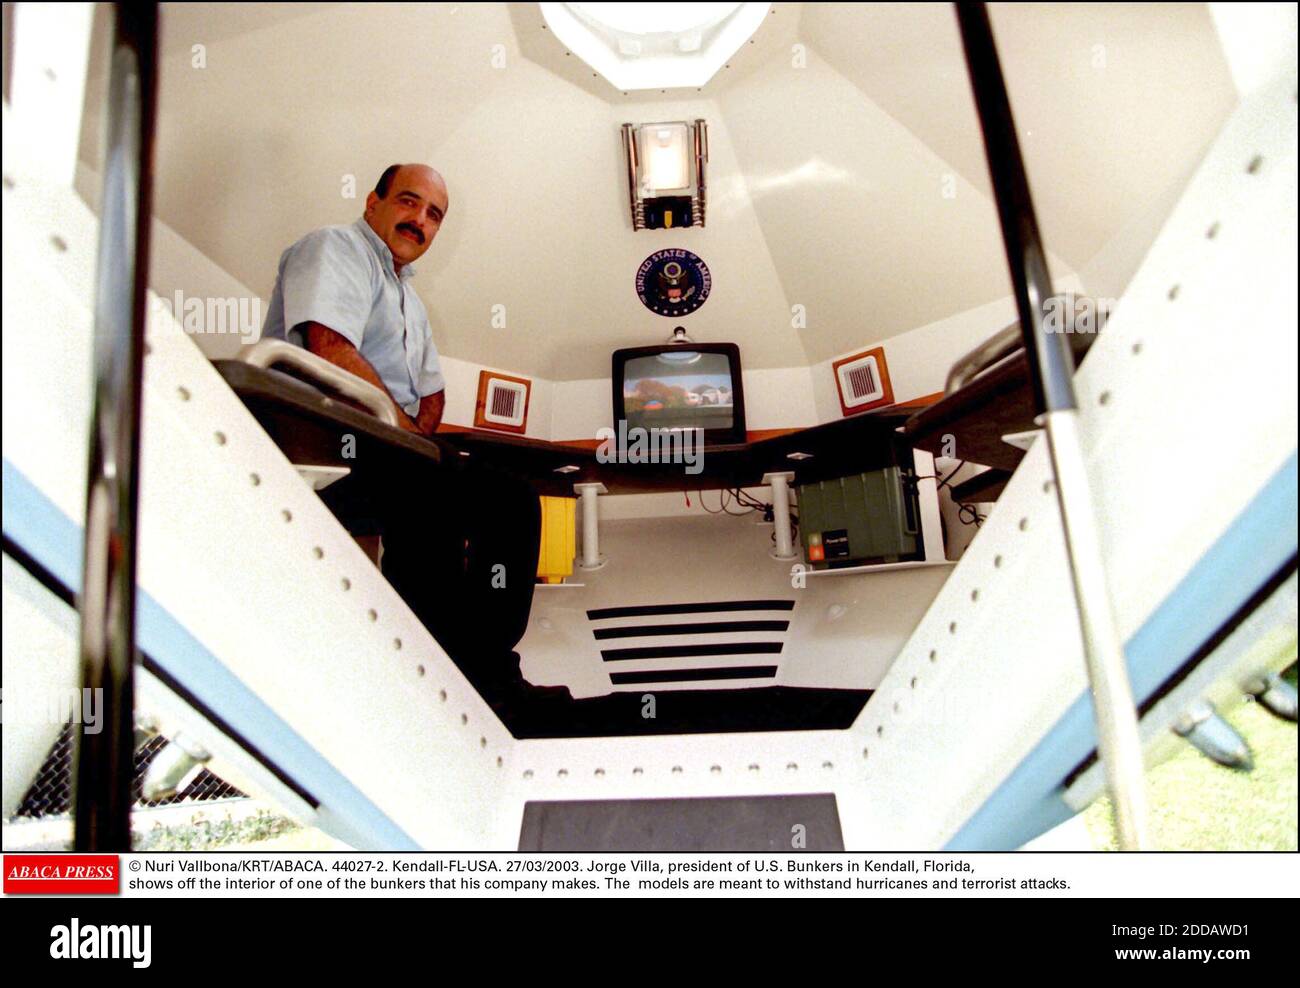 NO FILM, NO VIDEO, NO TV, NO DOCUMENTARY - © Nuri Vallbona/KRT/ABACA. 44027-2. Kendall-FL-USA. 27/03/2003. Jorge Villa, president of U.S. Bunkers in Kendall, Florida, shows off the interior of one of the bunkers that his company makes. The models are meant to withstand hurricanes and terrorist att Stock Photo